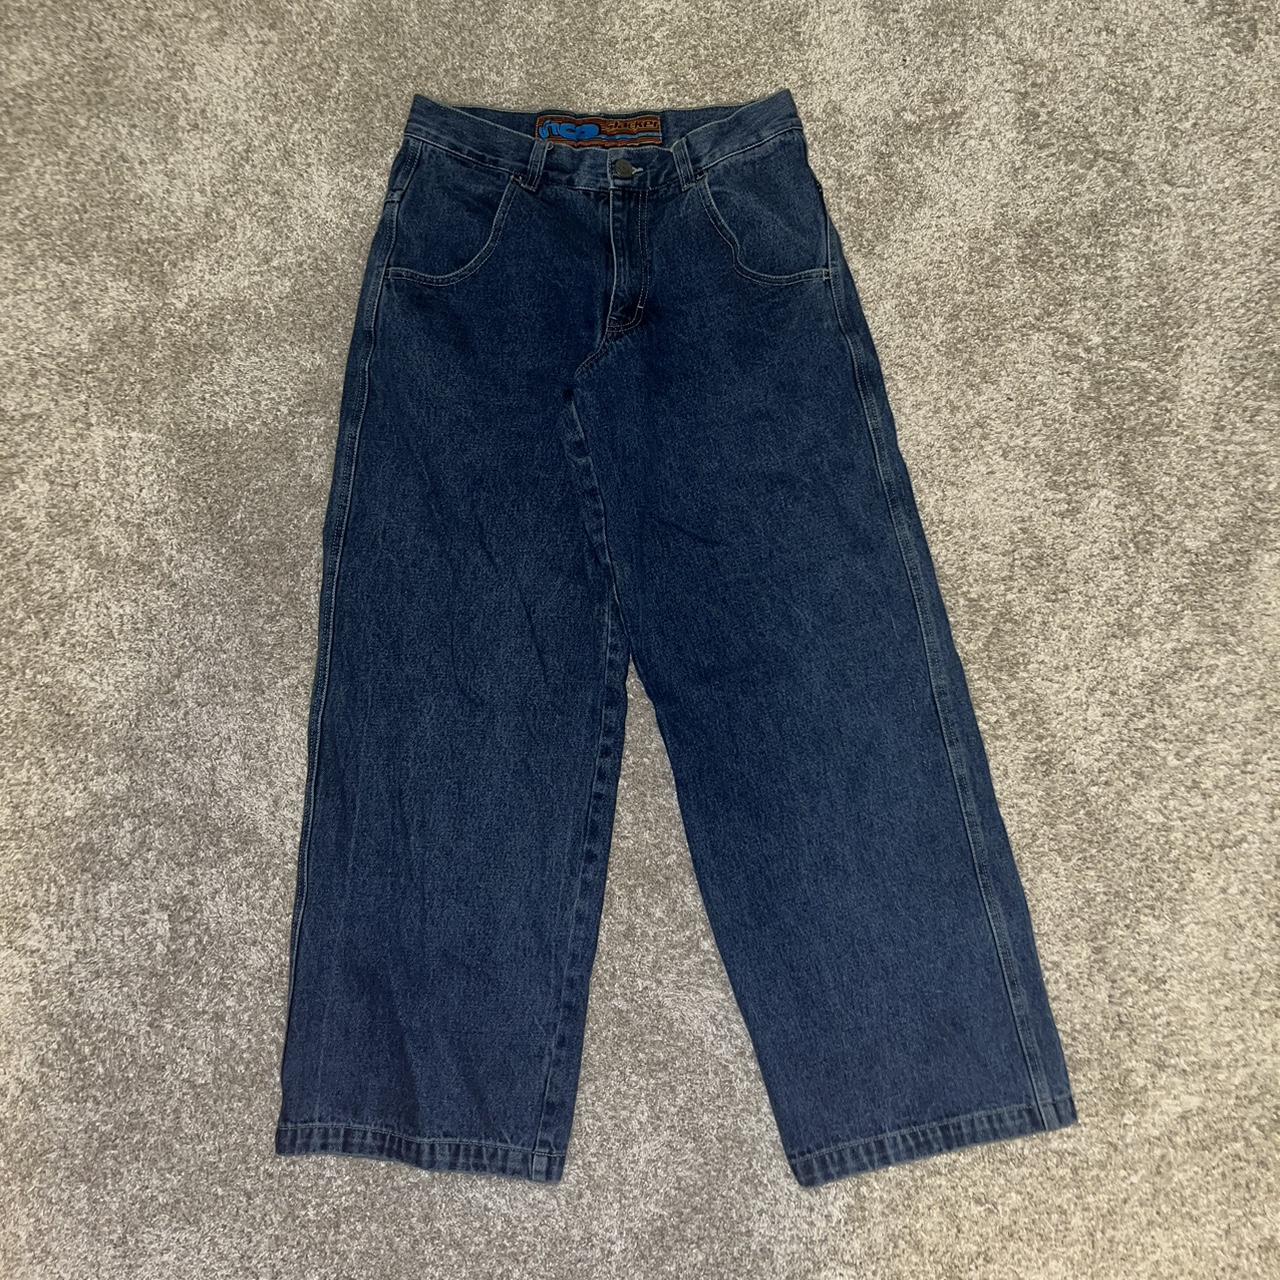 INTEREST POST THESE JEANS ARE SOLD! - Depop